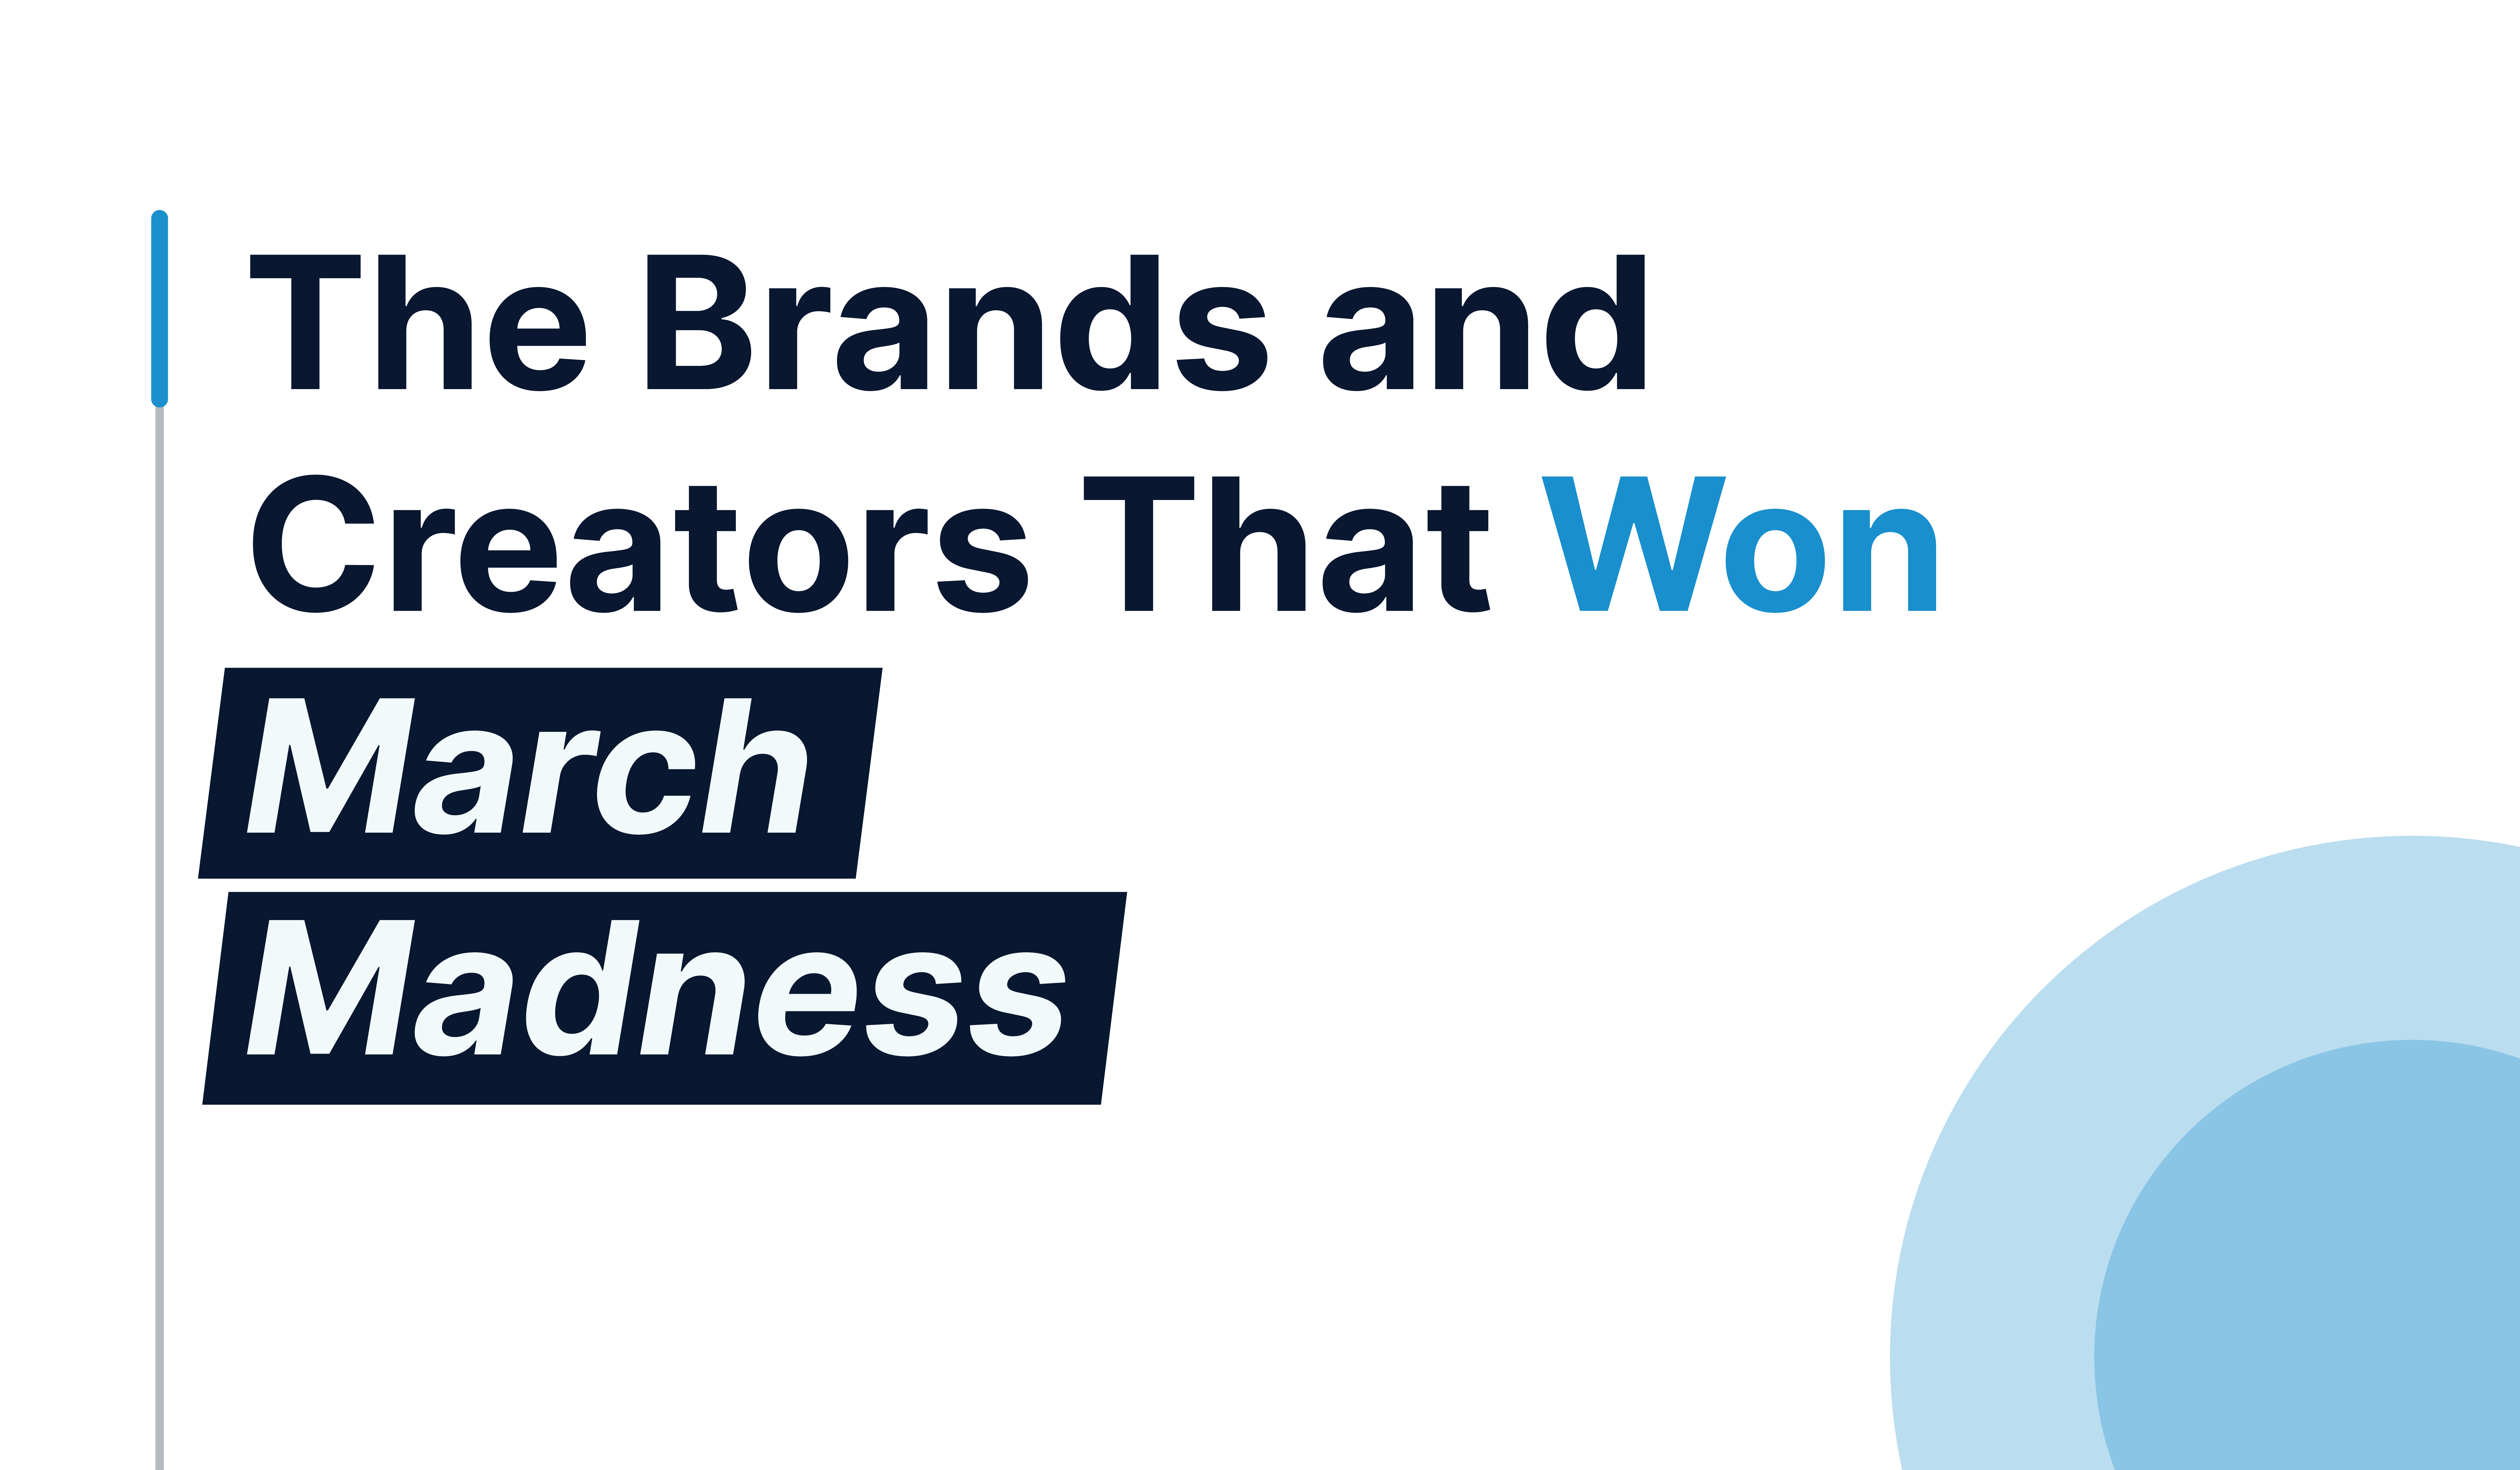 The Brands and Creators That Won March Madness